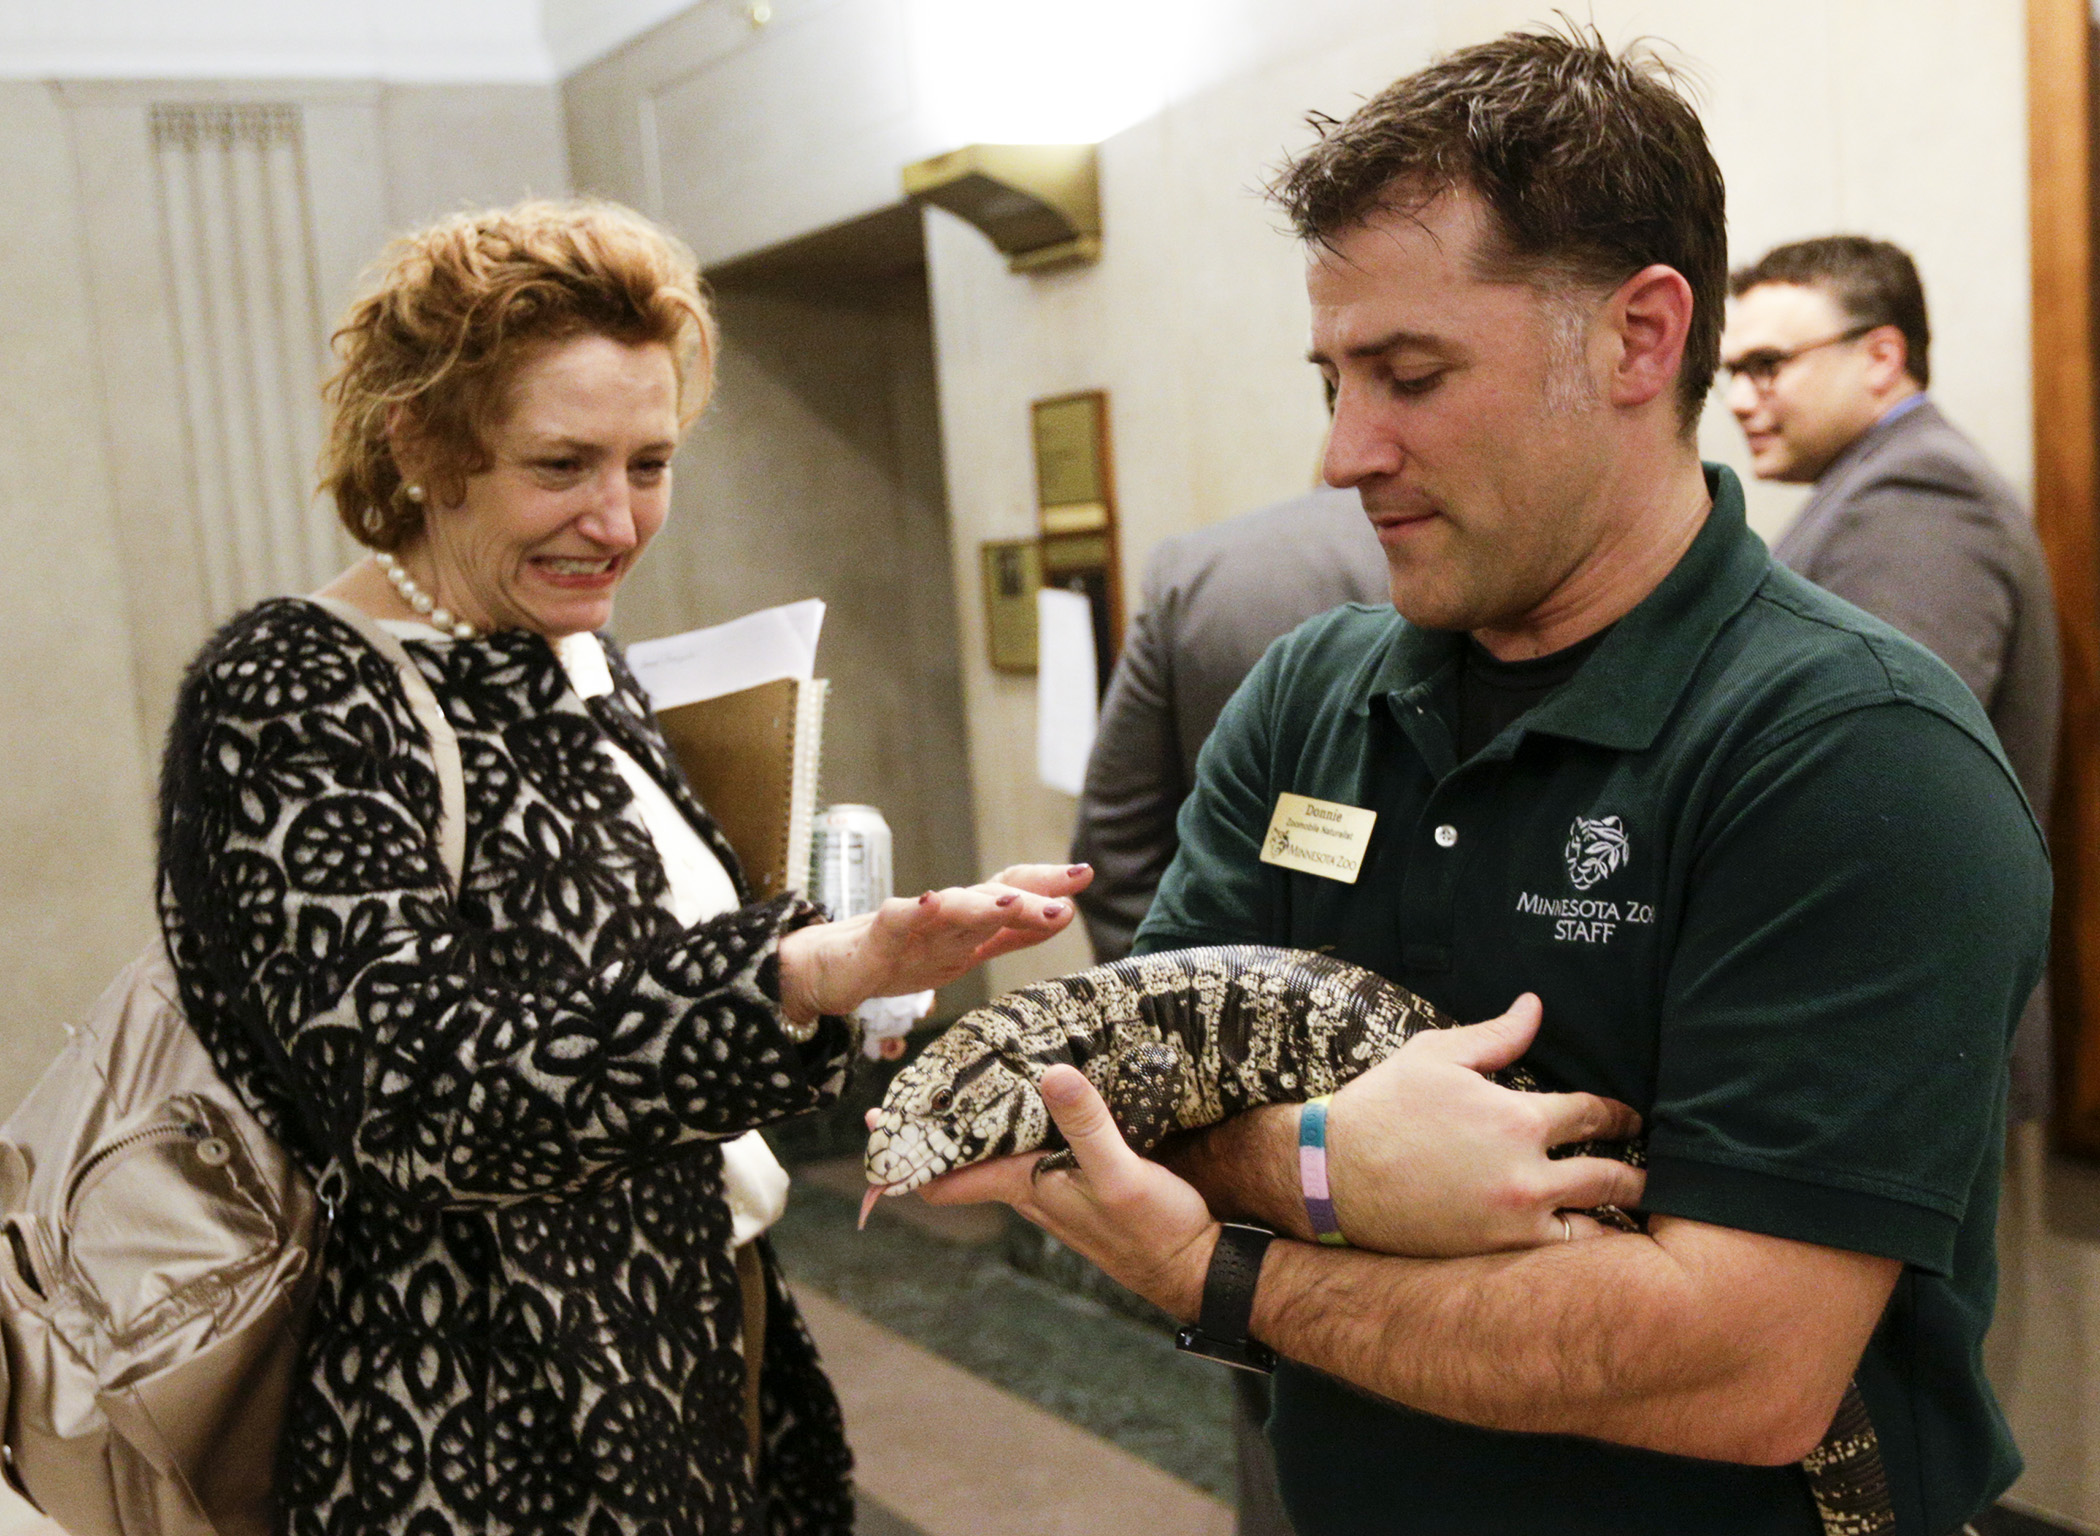 Lobbyist Sonnie Elliott reluctantly pets Evita, an Argentine black and white Tegu lizard held by Minnesota Zoo staffer Donnie Crook, before zoo leaders presented their 2018 bonding request to the House Capital Investment Committee. Photo by Paul Battaglia